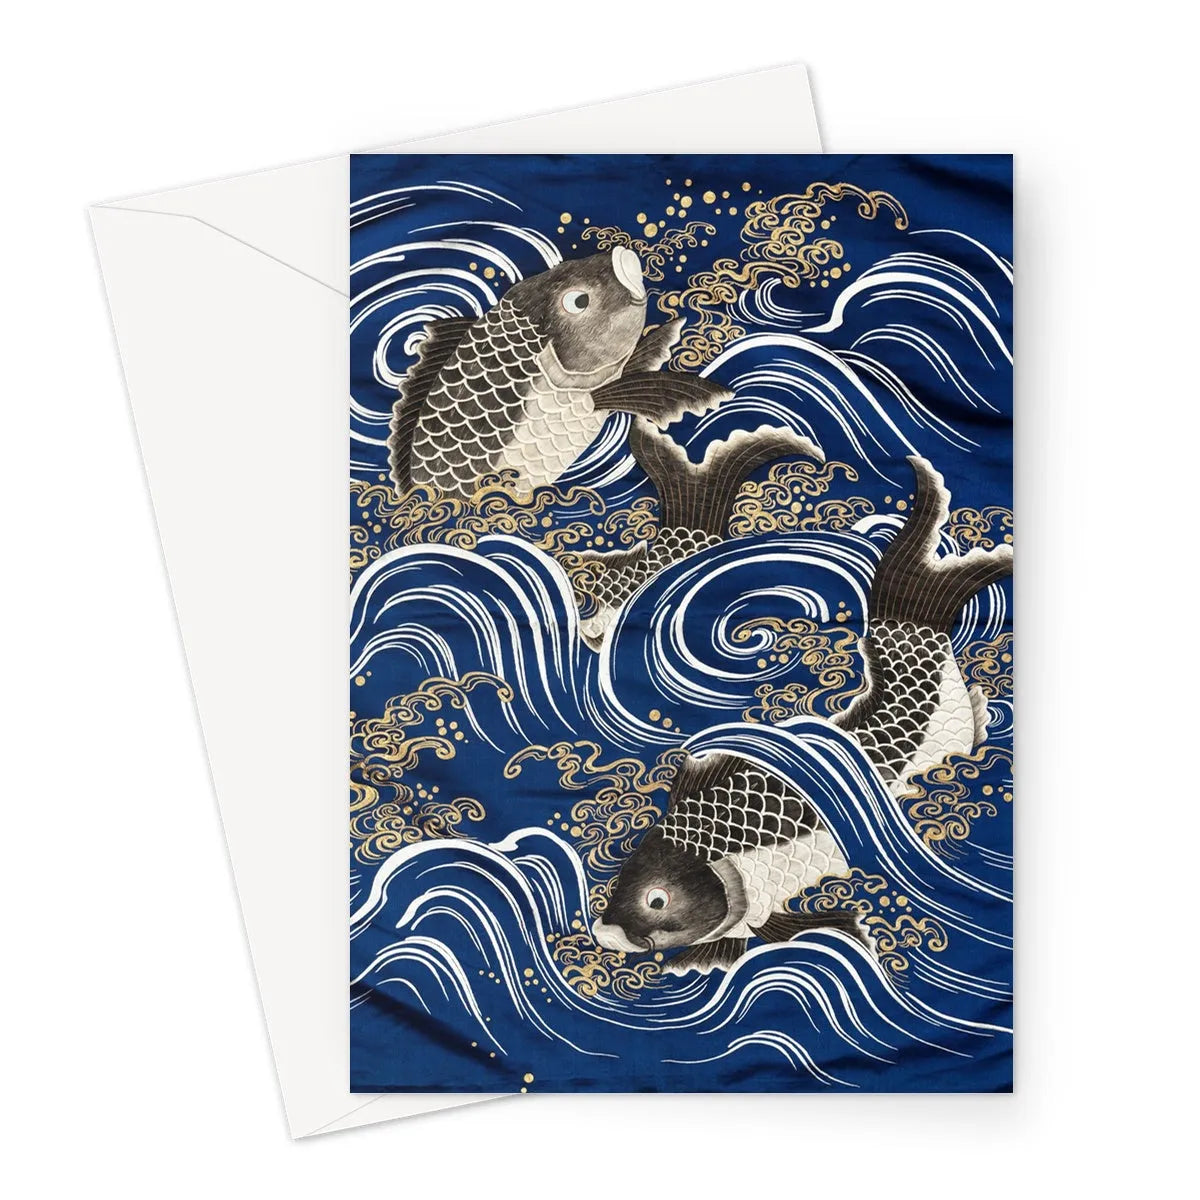 Fukusa + Carp In Waves - Meiji Period Greeting Card - A5 Portrait / 1 Card - Greeting & Note Cards - Aesthetic Art